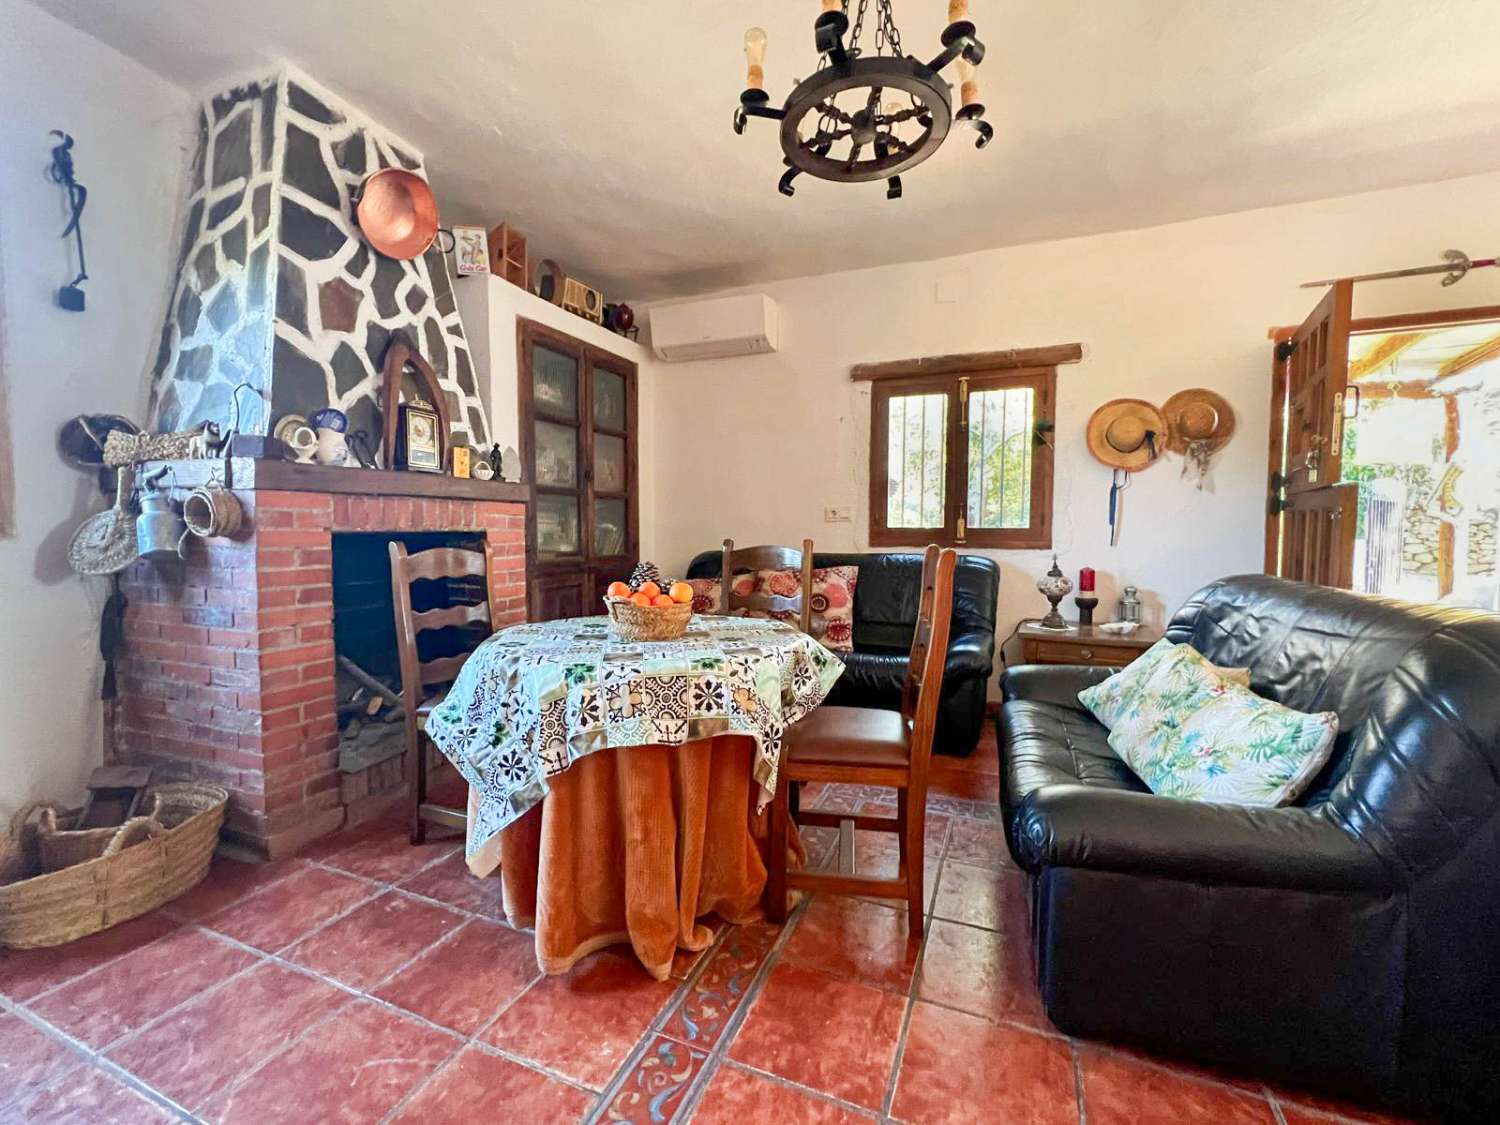 House for rent in Lanjarón